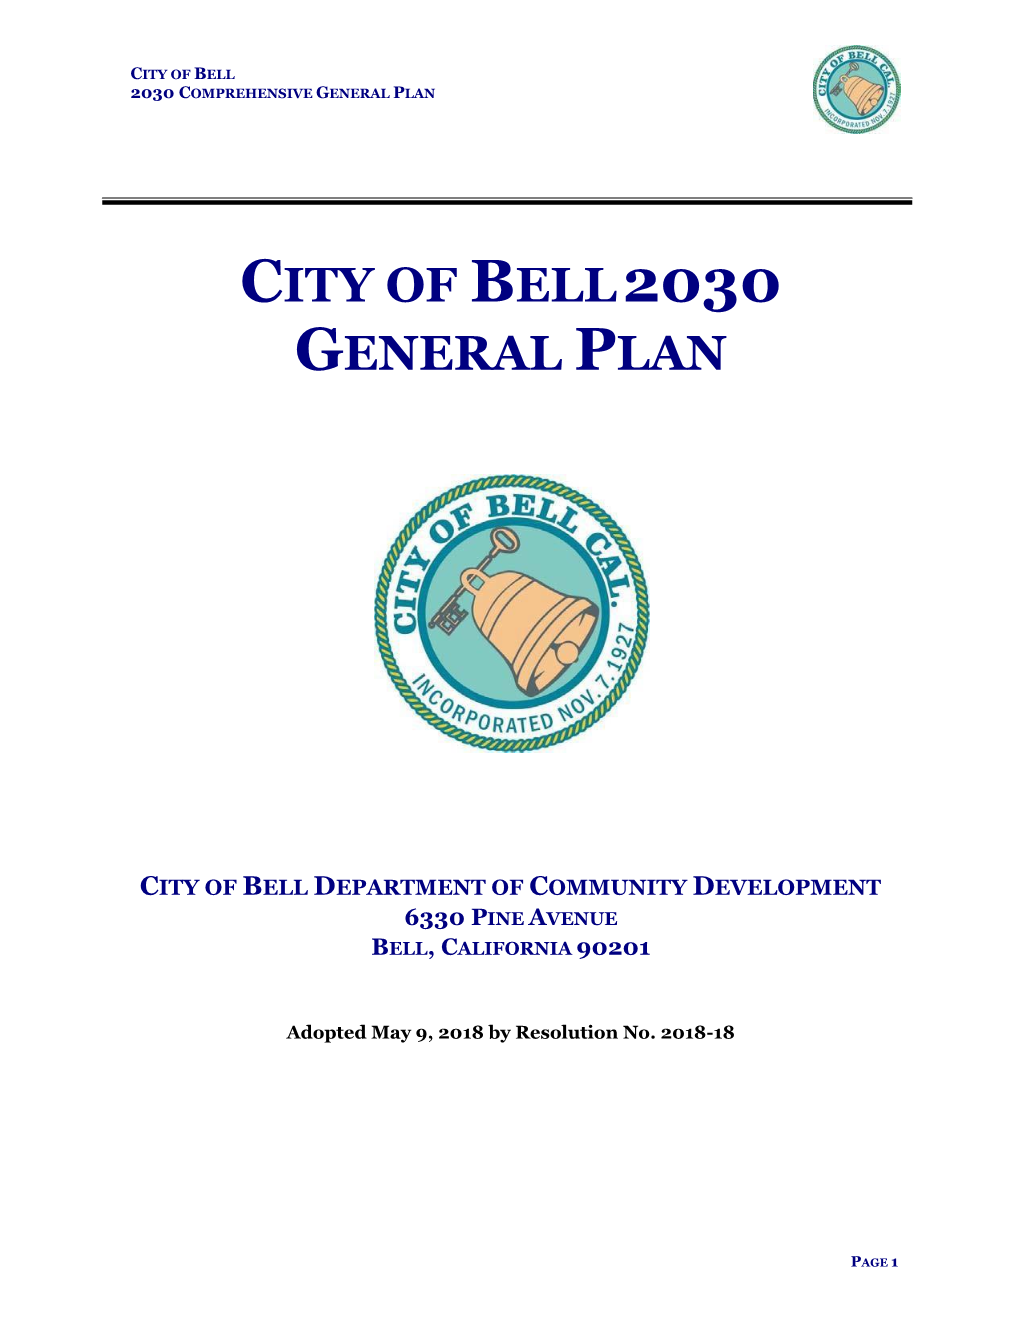 City of Bell 2030 General Plan